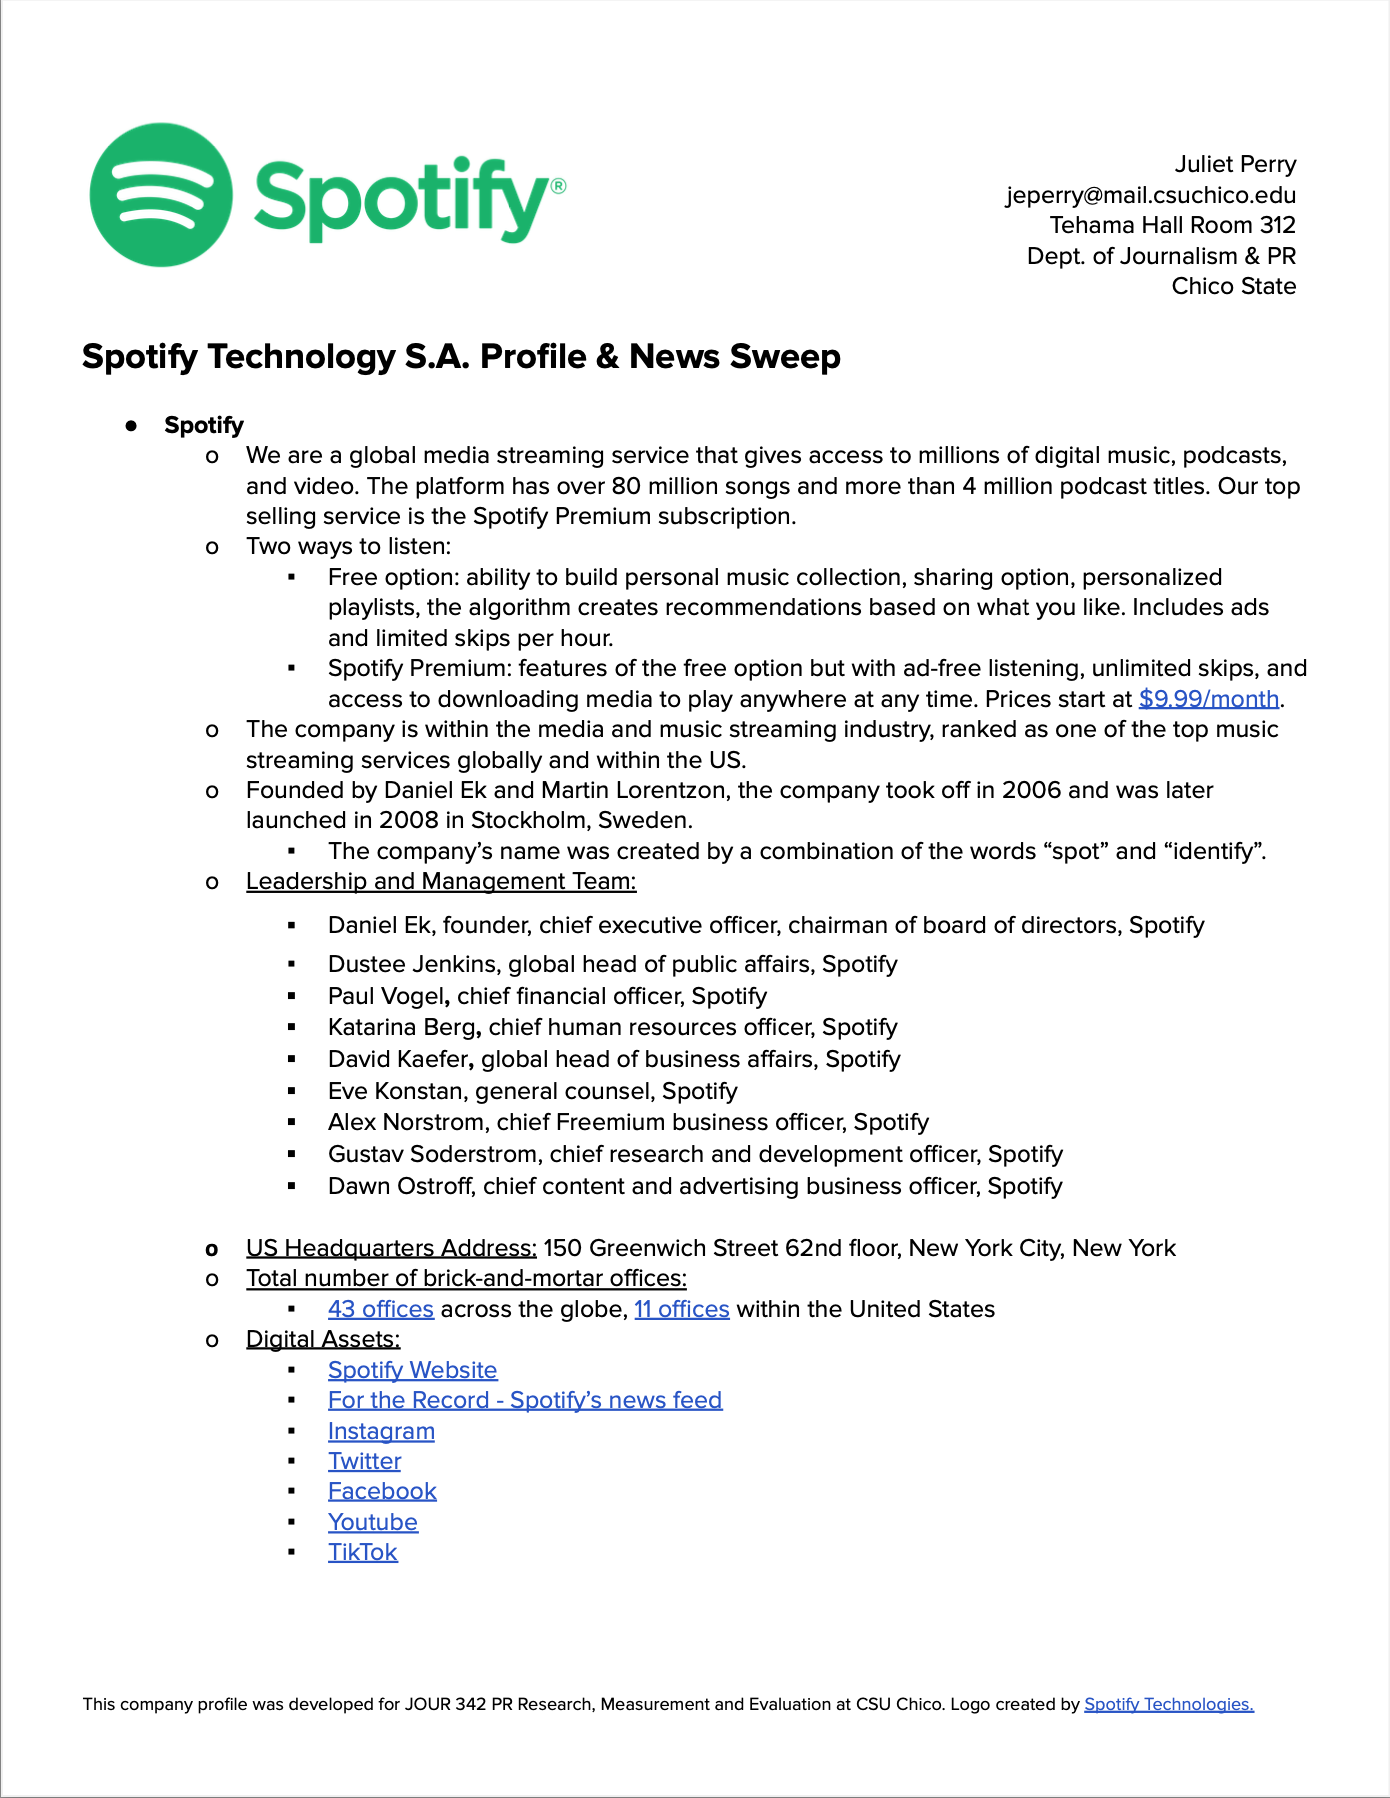 Spotify Profile and News Sweep for Journalism 342.